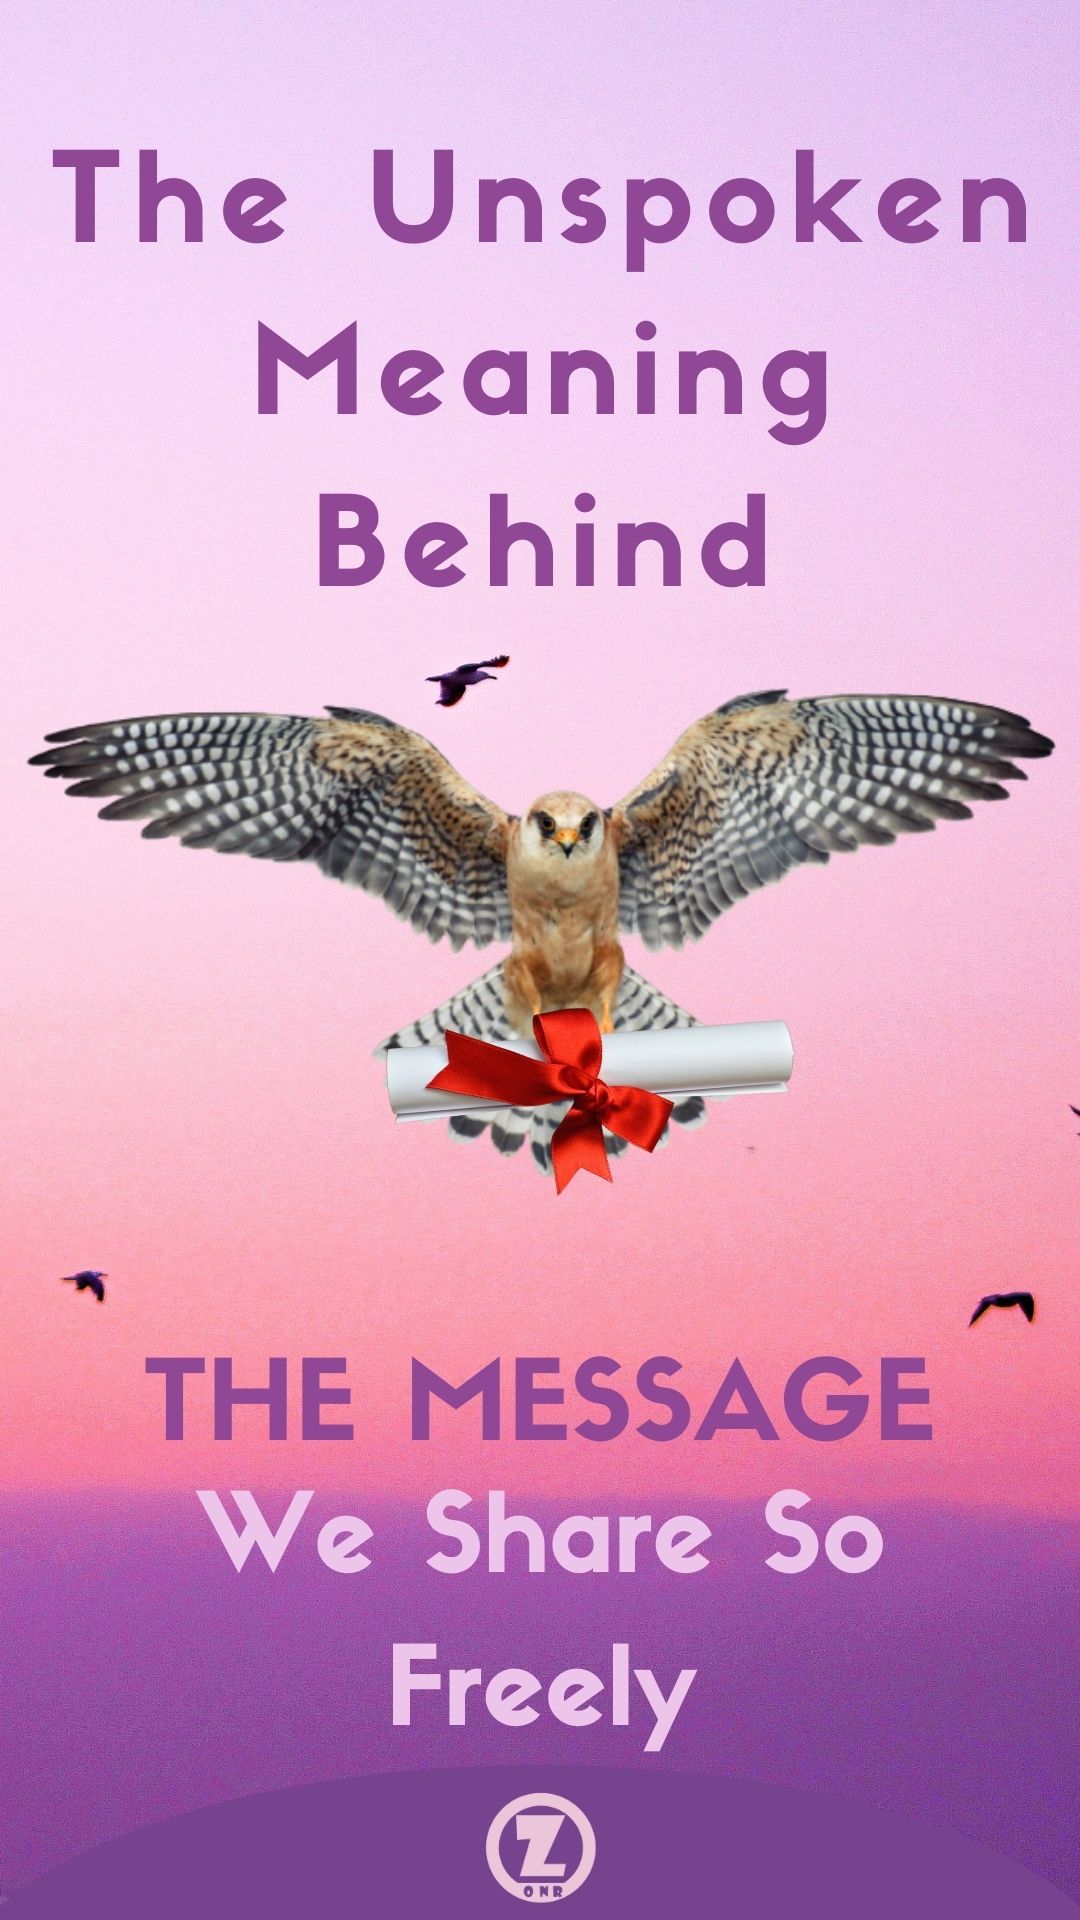 You are currently viewing The Unspoken Meaning of THE MESSAGE We Share So Freely – Step 12 begins